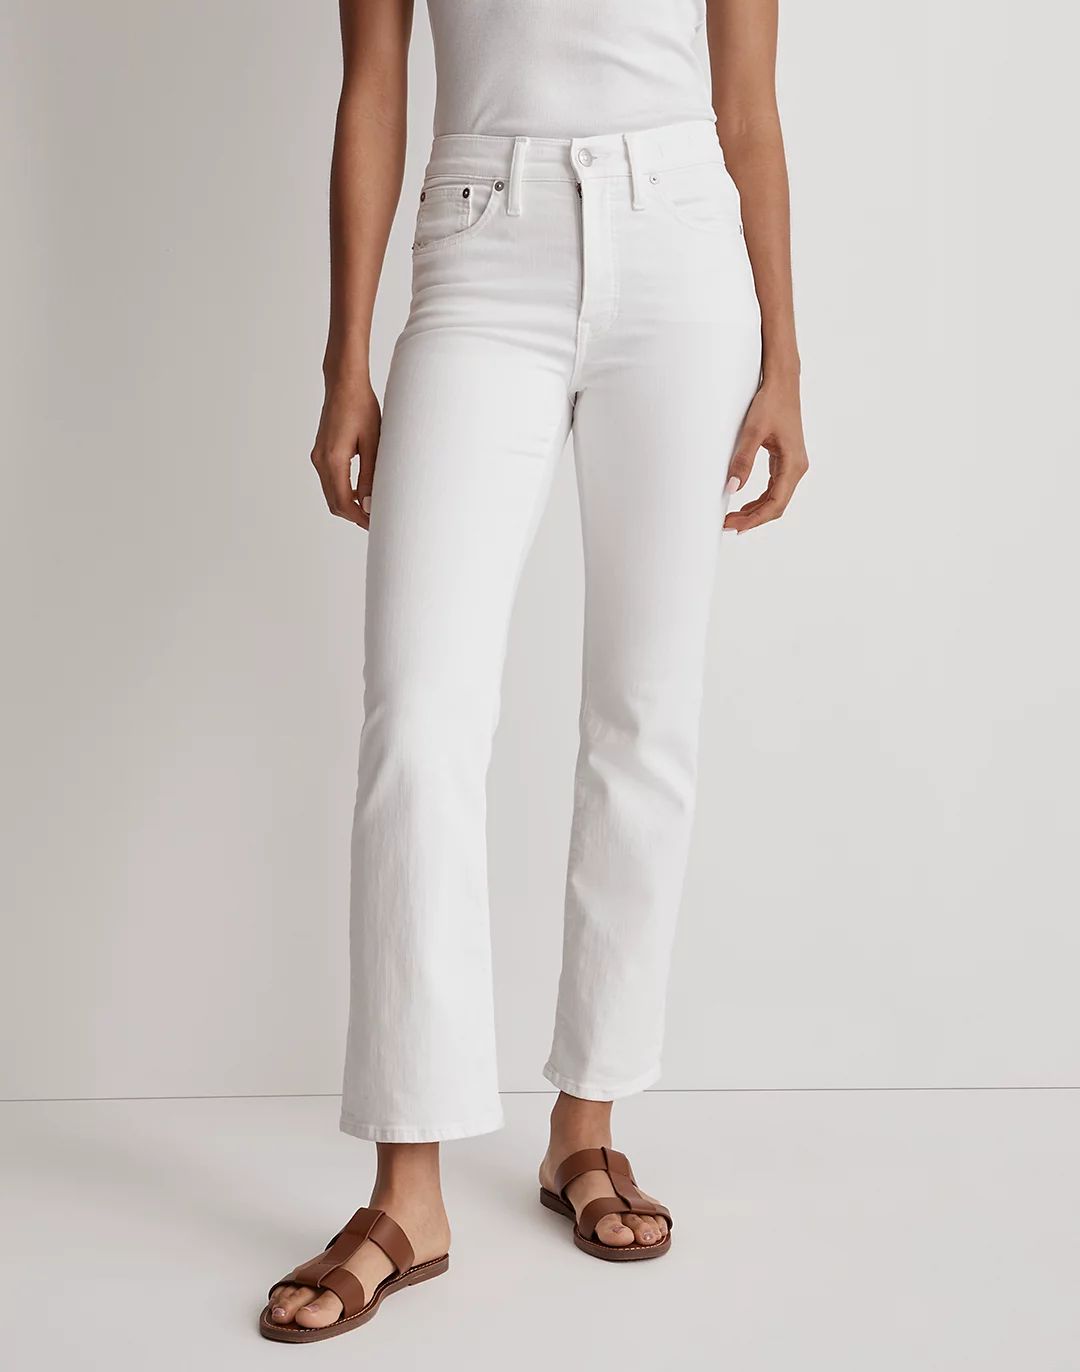 Kick Out Crop Jeans in Pure White | Madewell